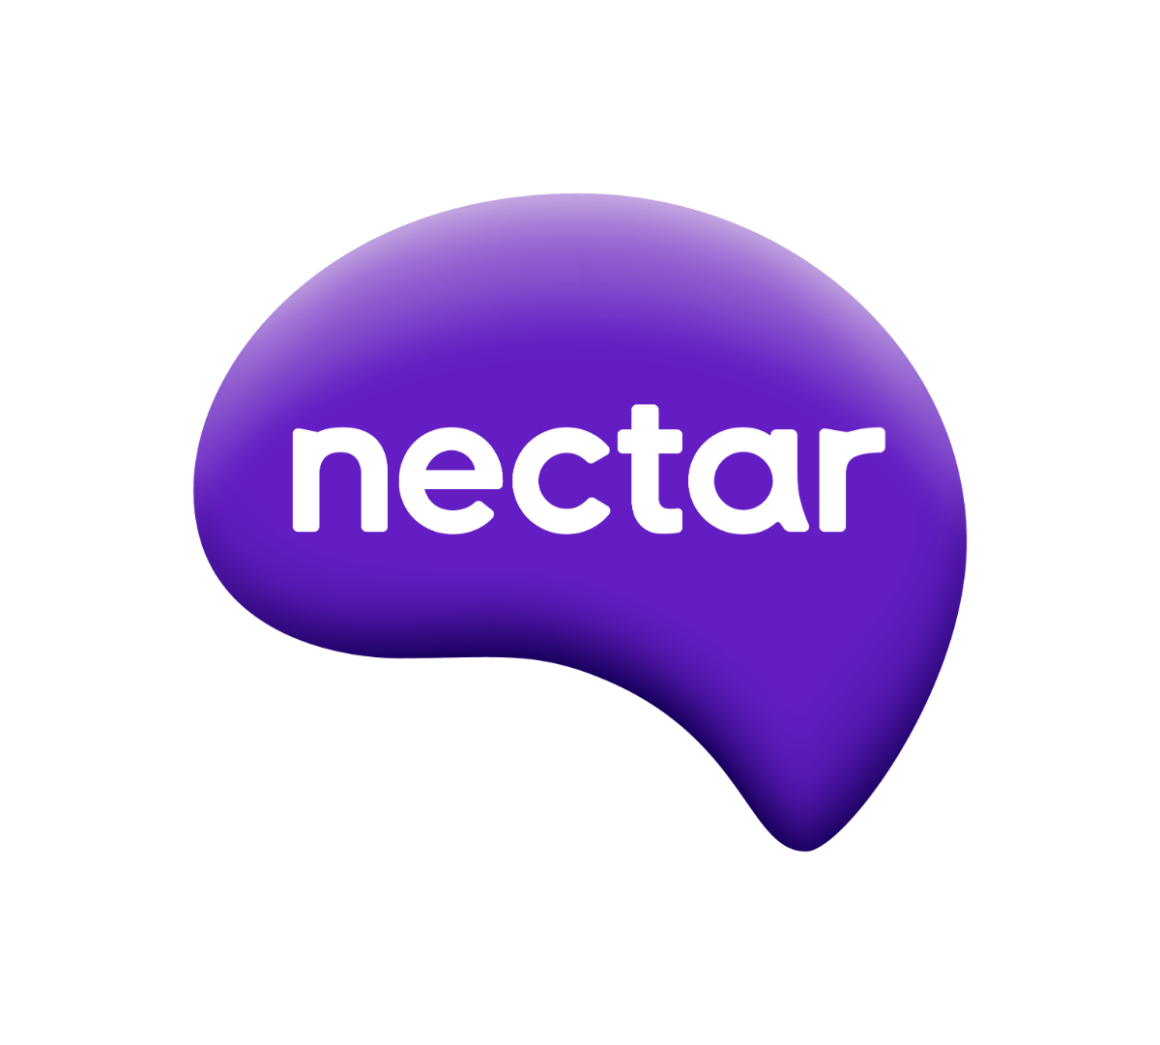 Is It Worth Converting Avios to Nectar